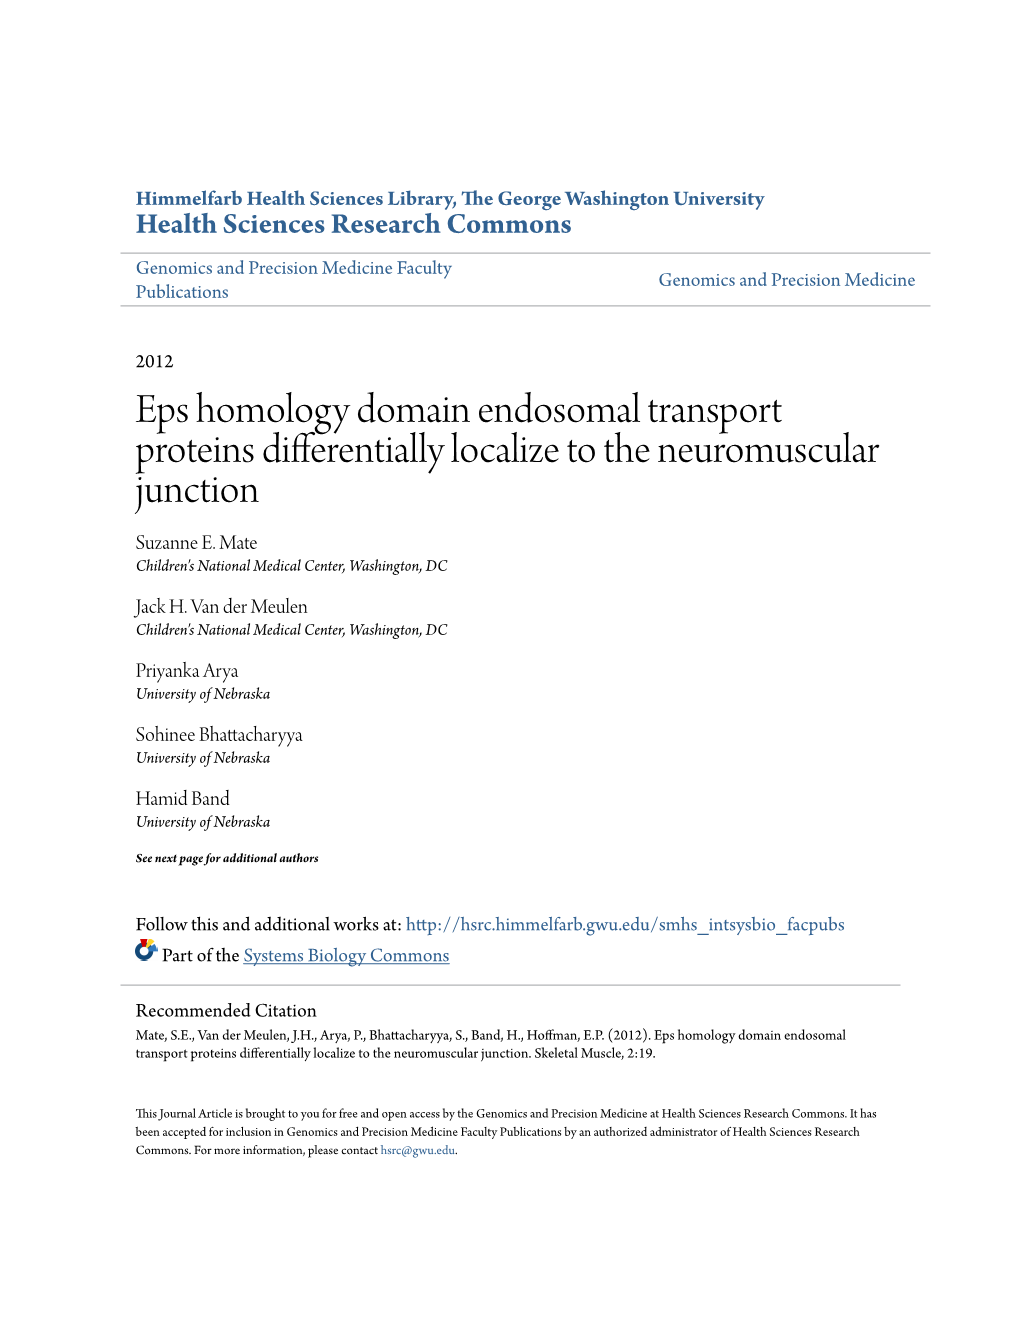 Eps Homology Domain Endosomal Transport Proteins Differentially Localize to the Neuromuscular Junction Suzanne E